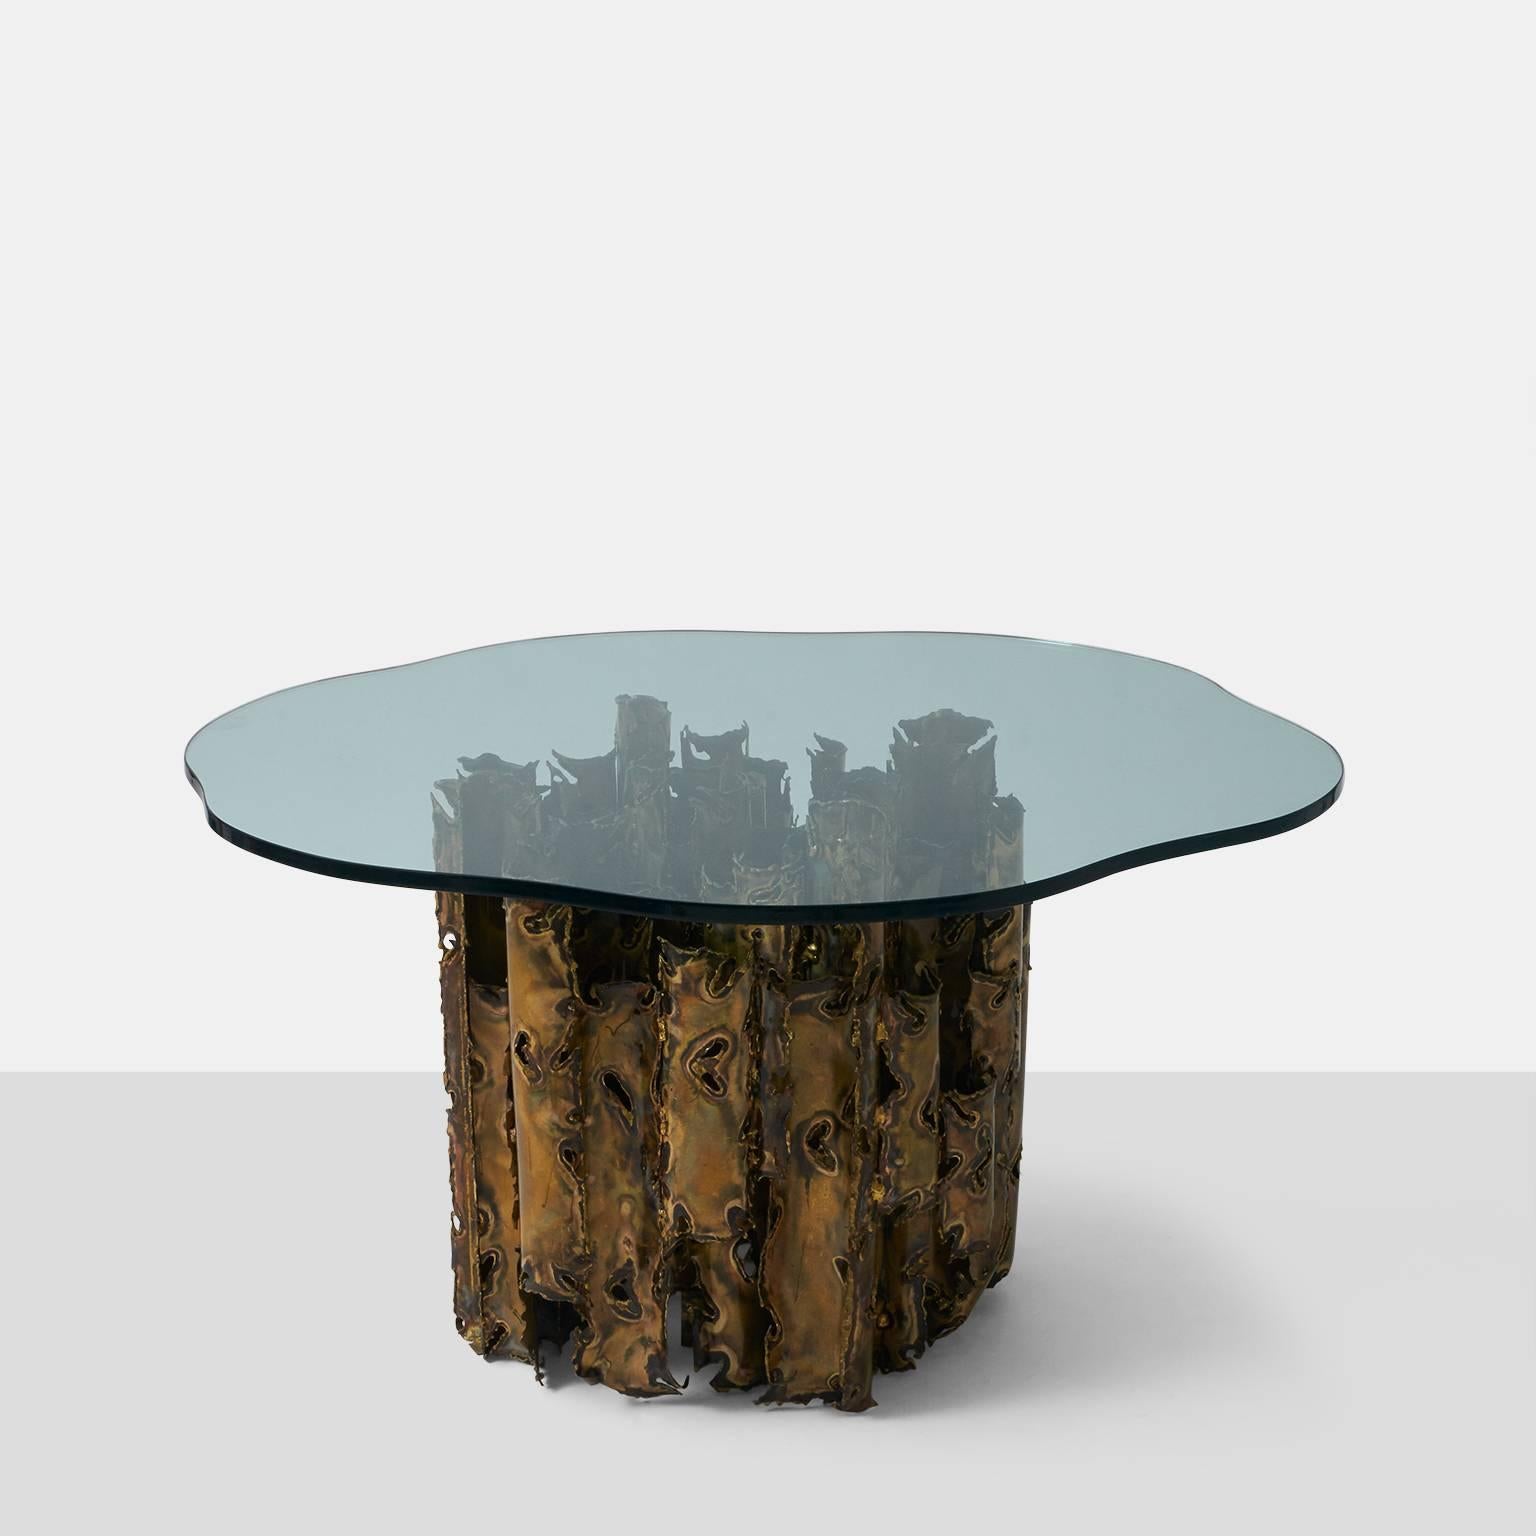 Silas Seandel - Cathedral series dining table
A dining table by Silas Seandel with a clear, amorphous glass top and hand-cut, welded and acid etched bronze base,
USA, 1970's.